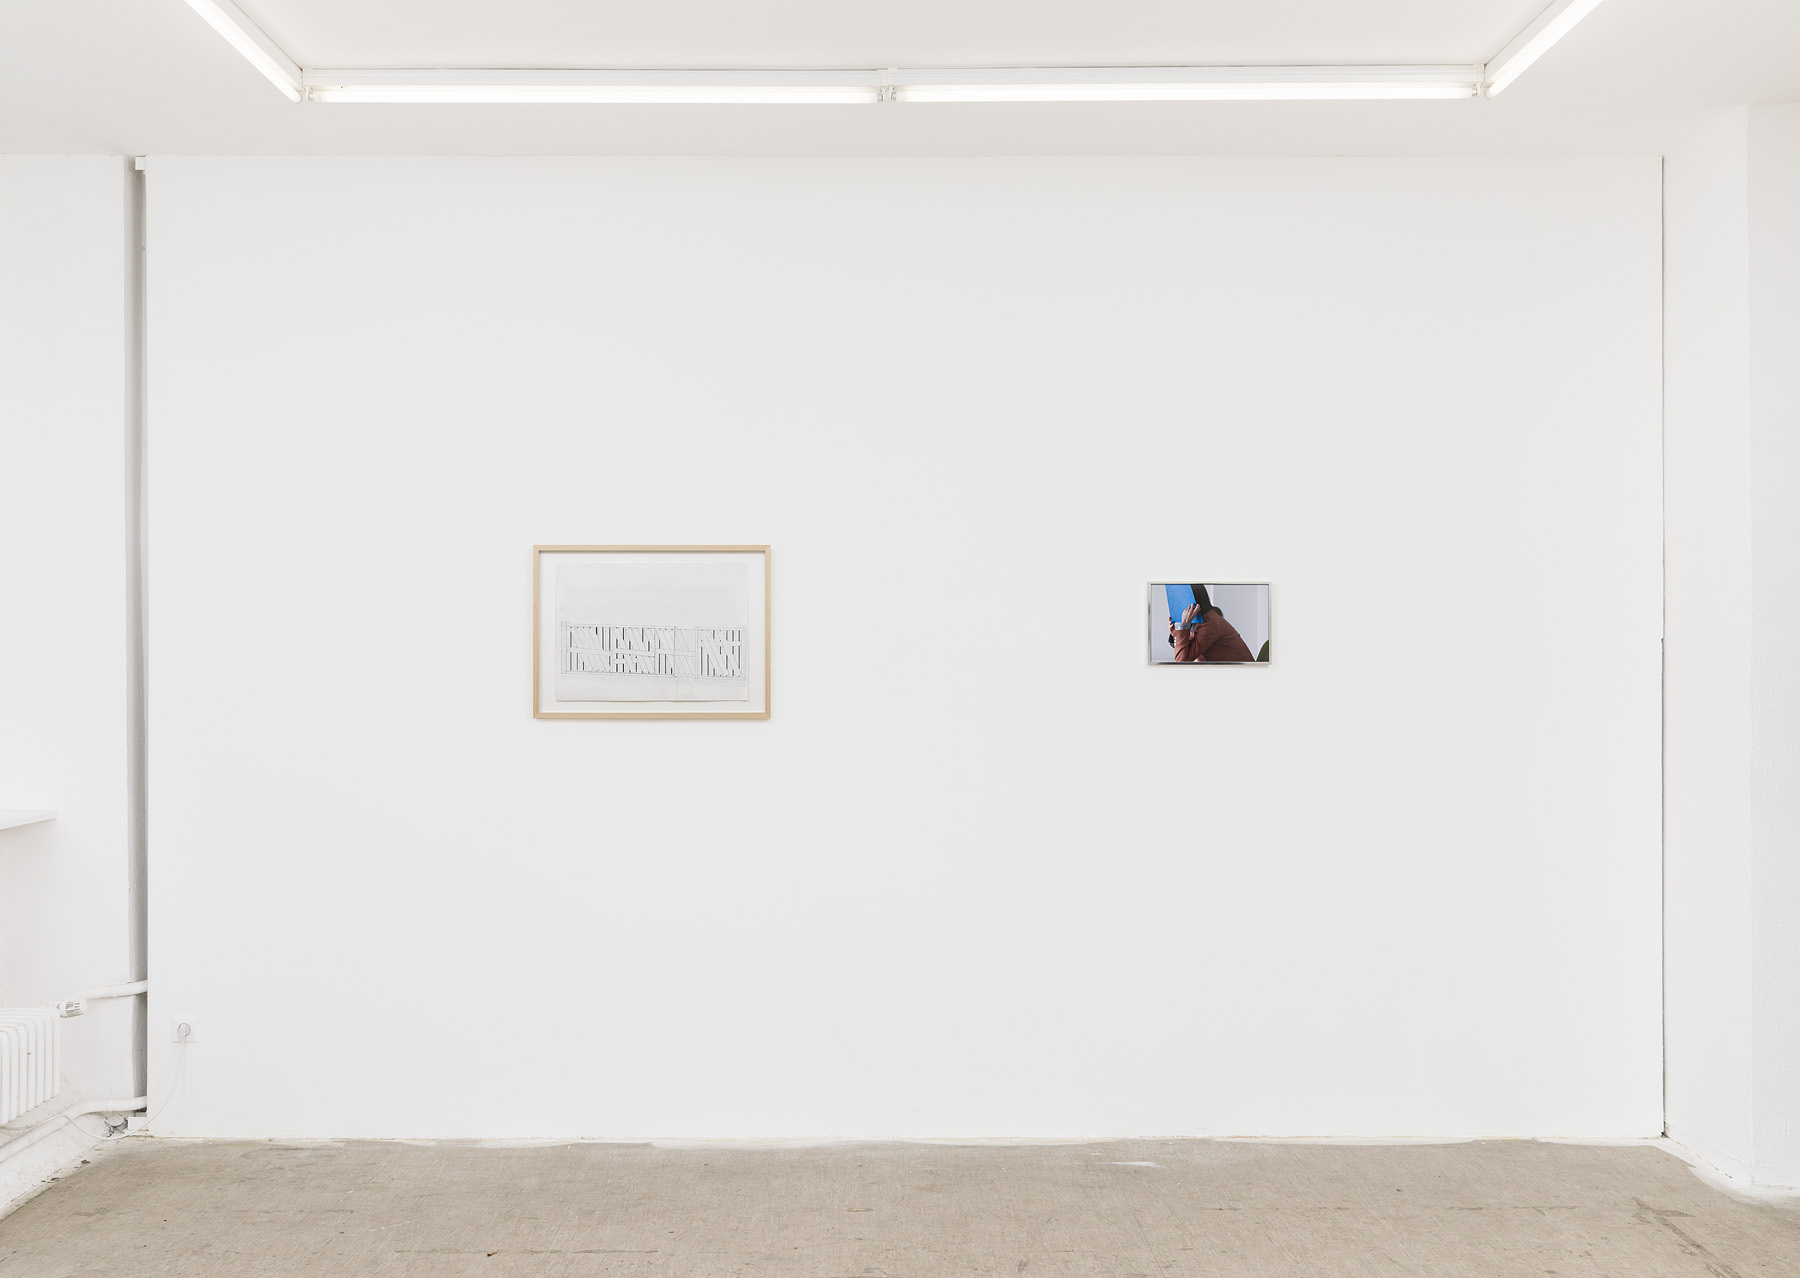 Installation view with: James Sturkey, Untitled, 2019, pen and correction fluid on paper, 72,5x52,5cm; Anna Ruthenberg, Untitled, 2020-2021, series of photographs, 25x37cm.